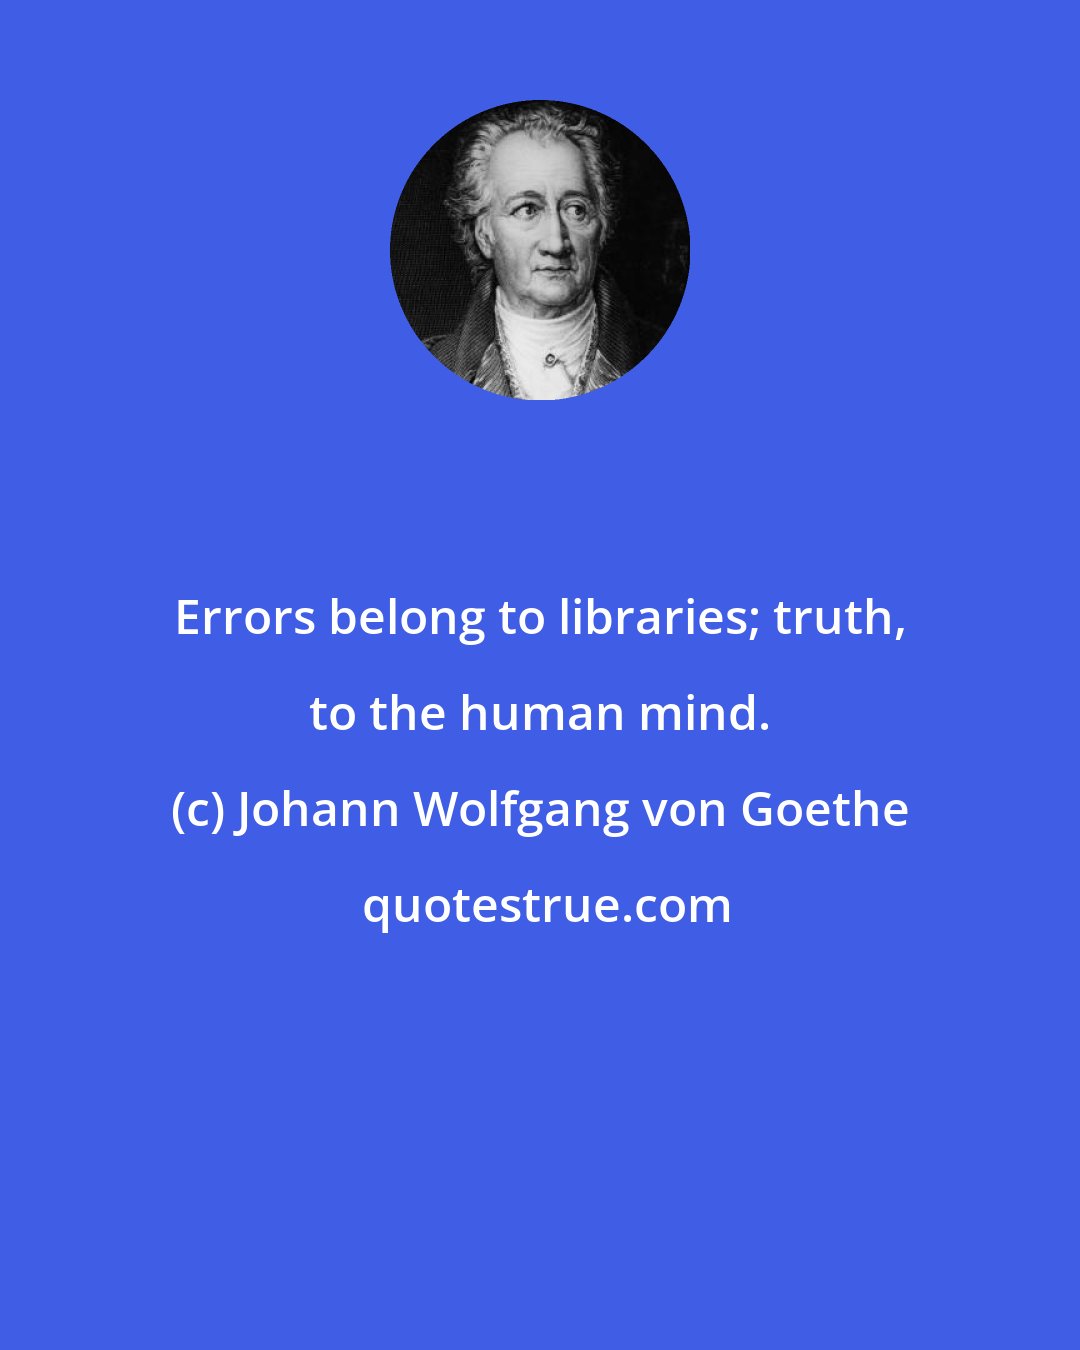 Johann Wolfgang von Goethe: Errors belong to libraries; truth, to the human mind.